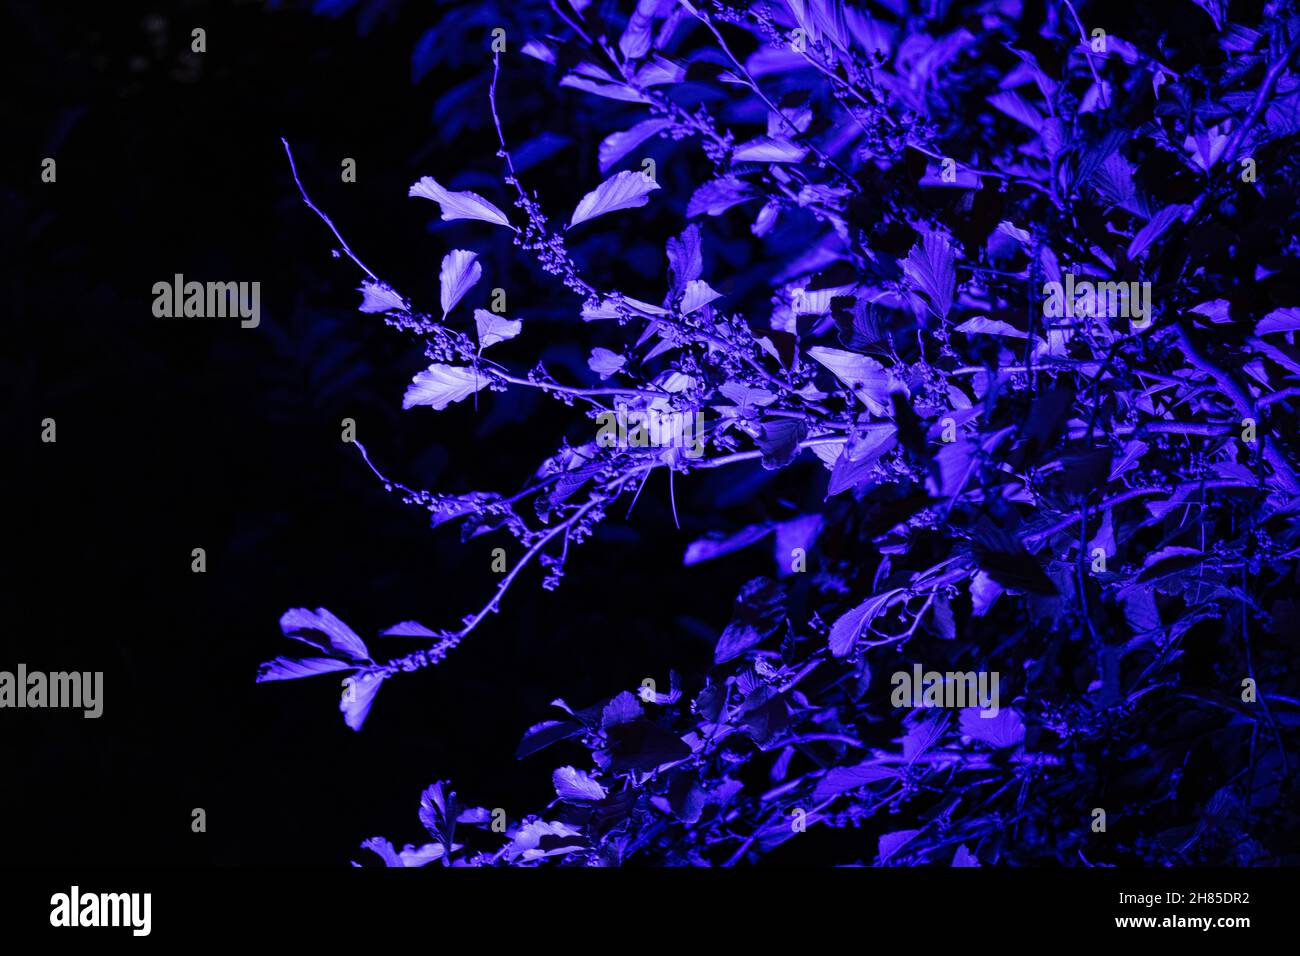 a shrub at night illuminated by a purple light creates a mysterious, spooky, eerie image Stock Photo